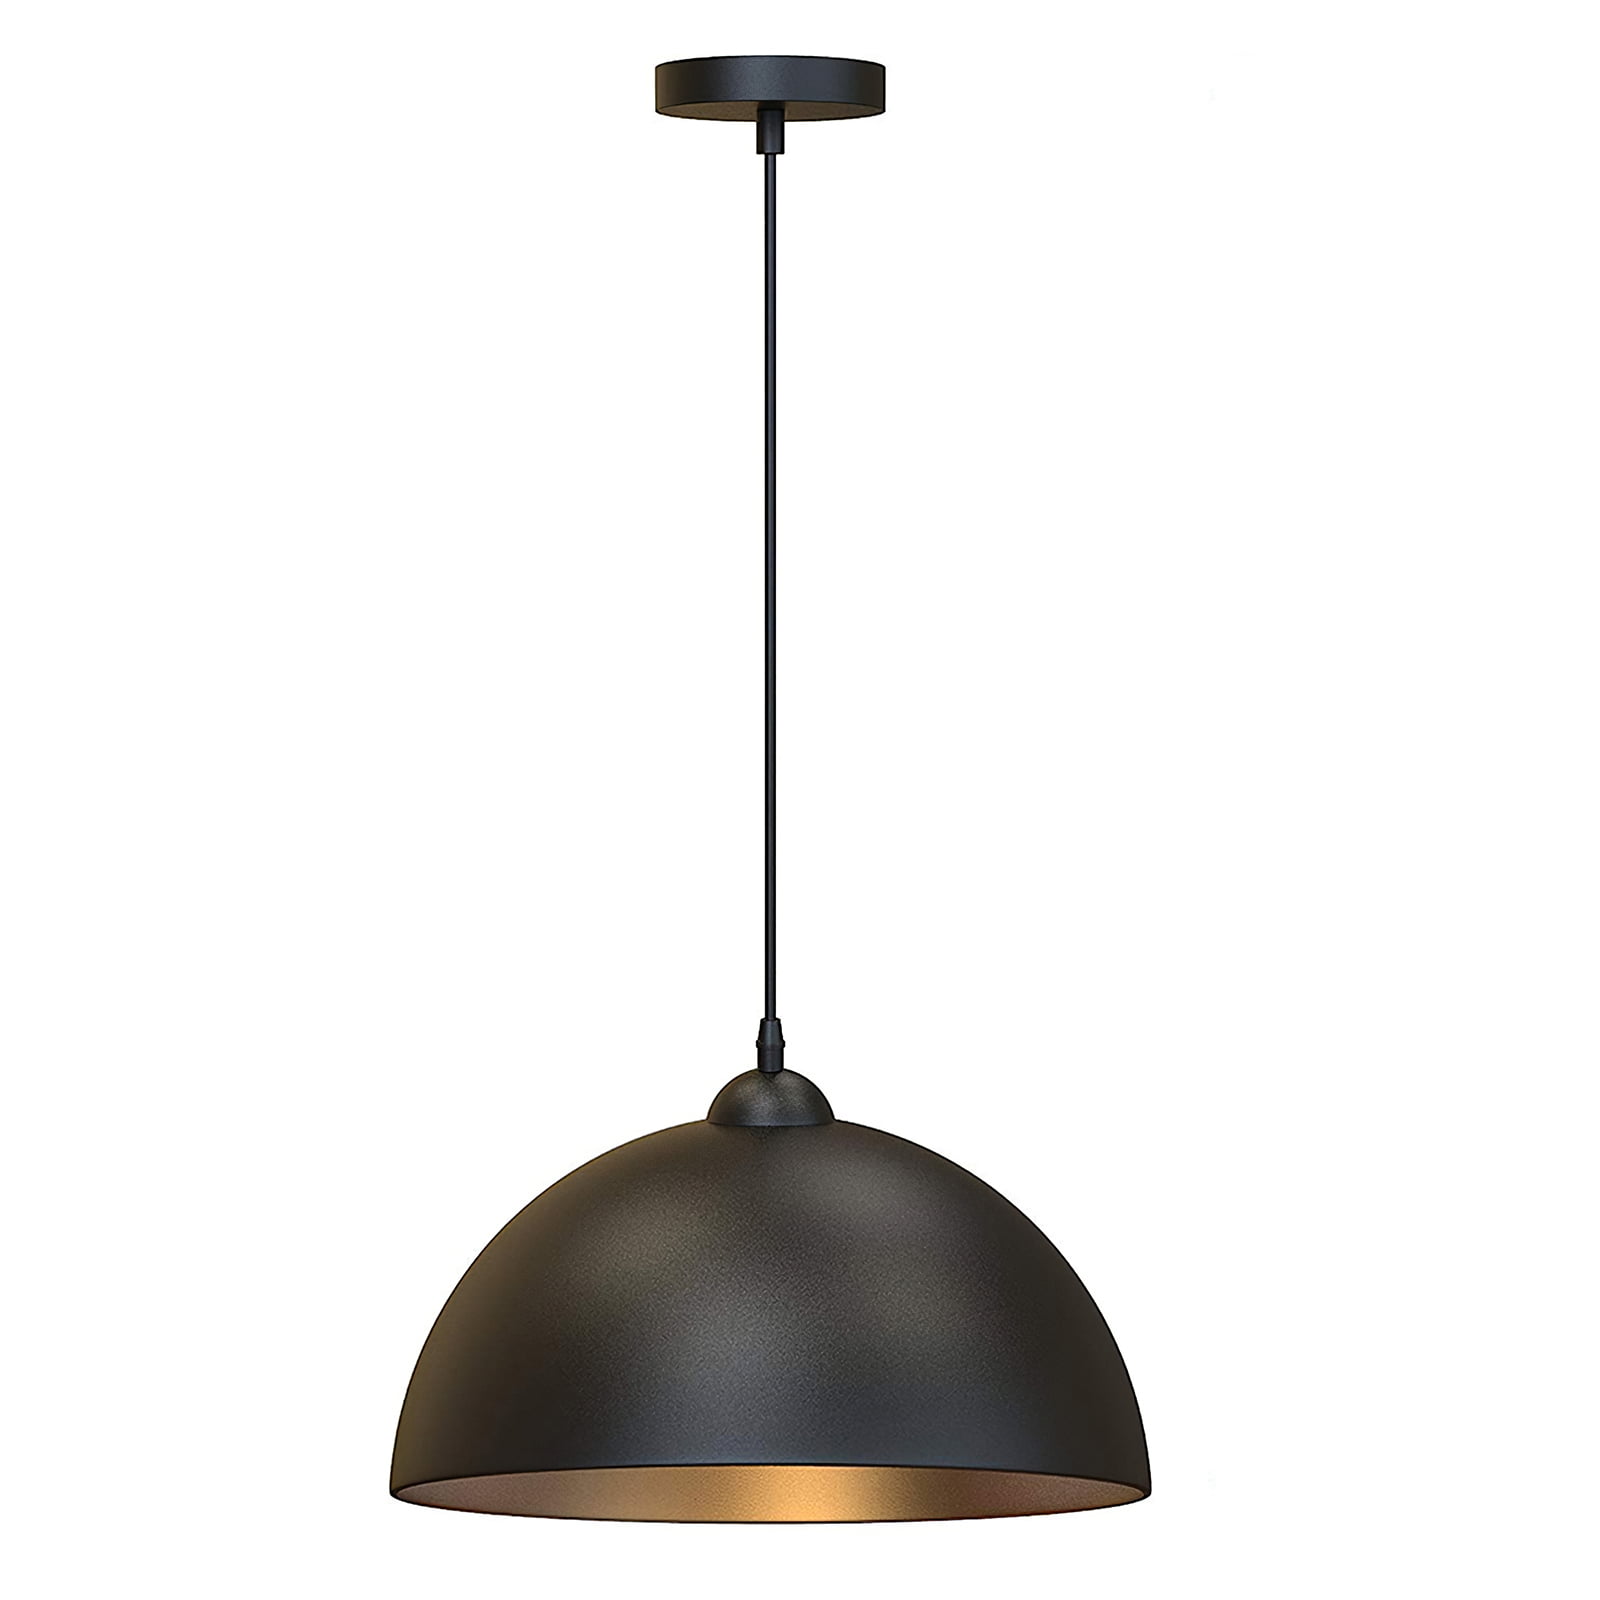 Retro Industrial Pendant Light Black Rust Silver Mental Shape Old Factory Style with Antique Finish 2 Sets Black Shape